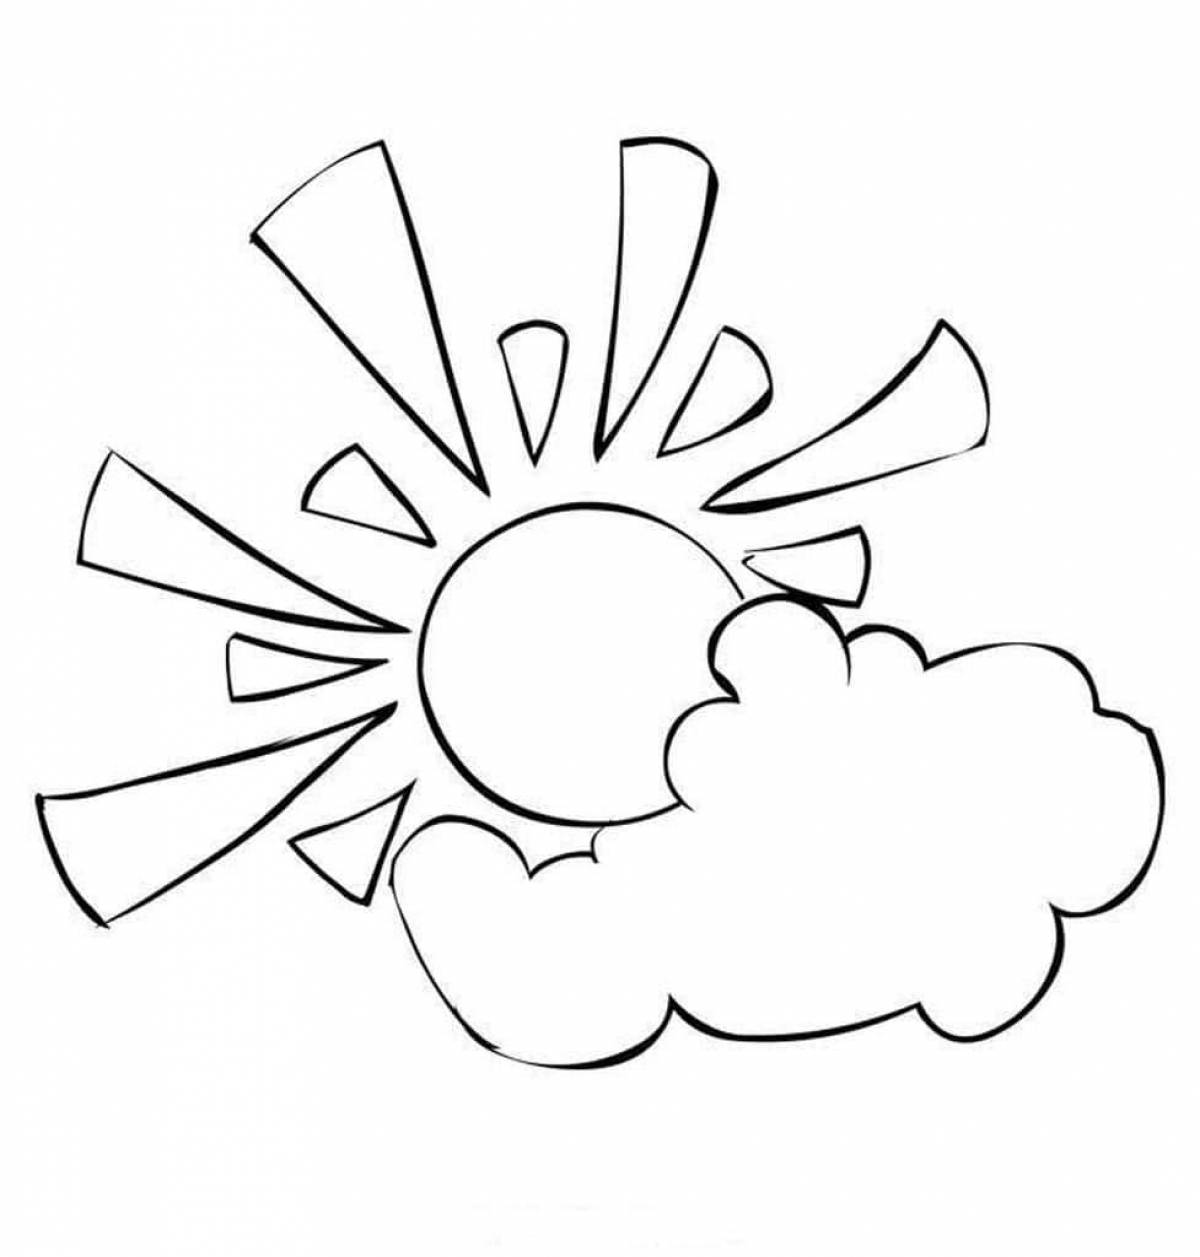 Sunshine riotous coloring book for kids